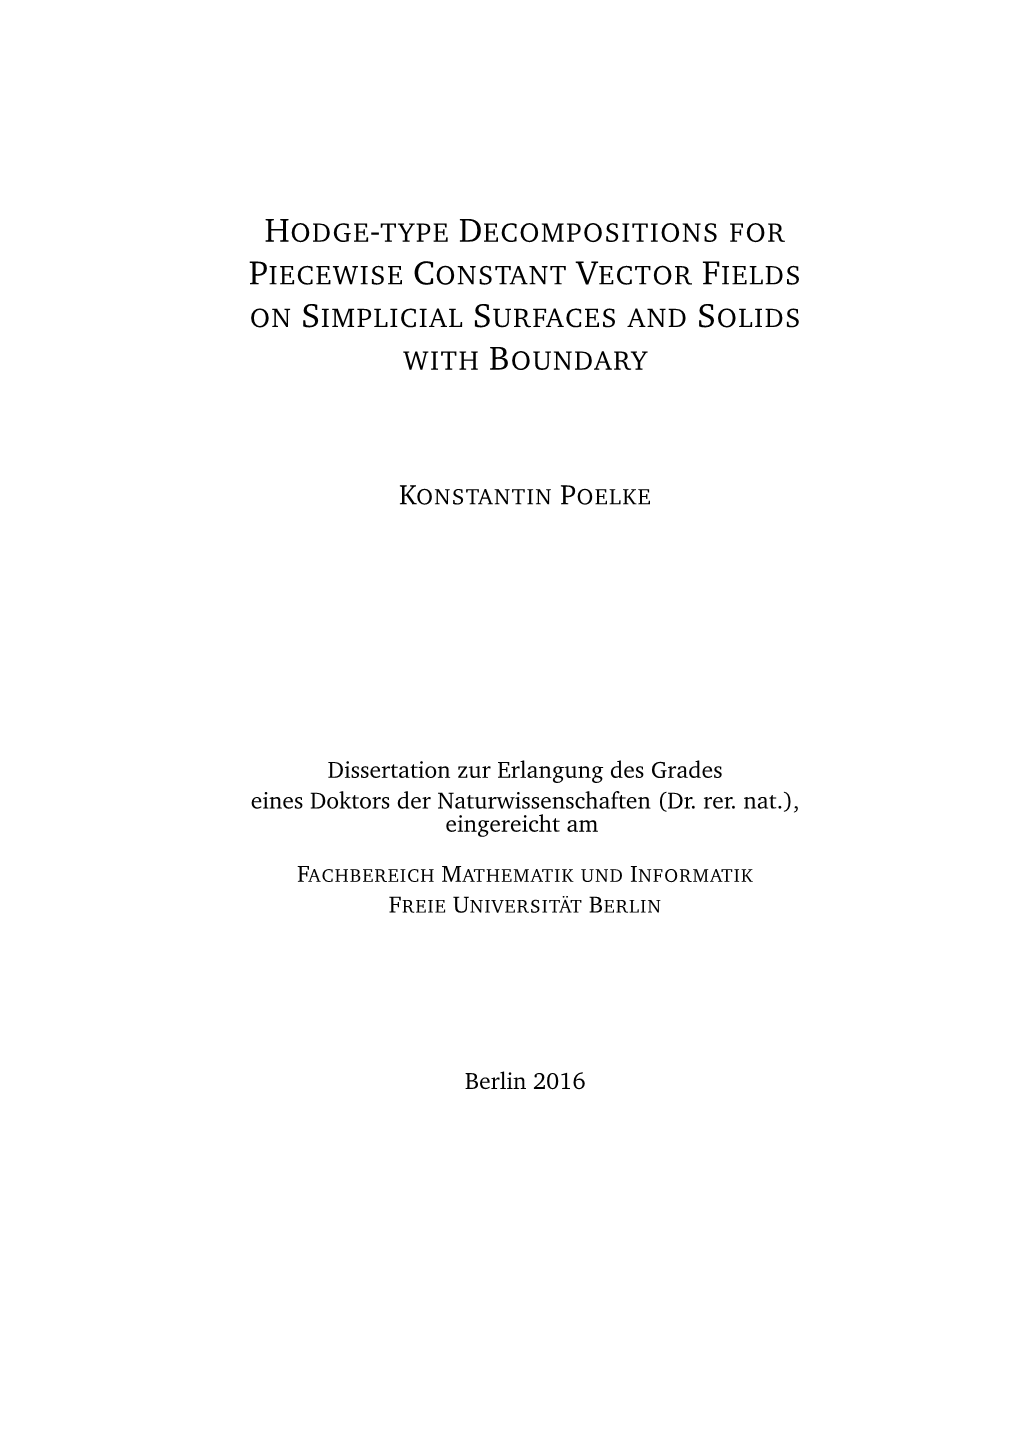 Hodge-Type Decompositions for Piecewise Constant